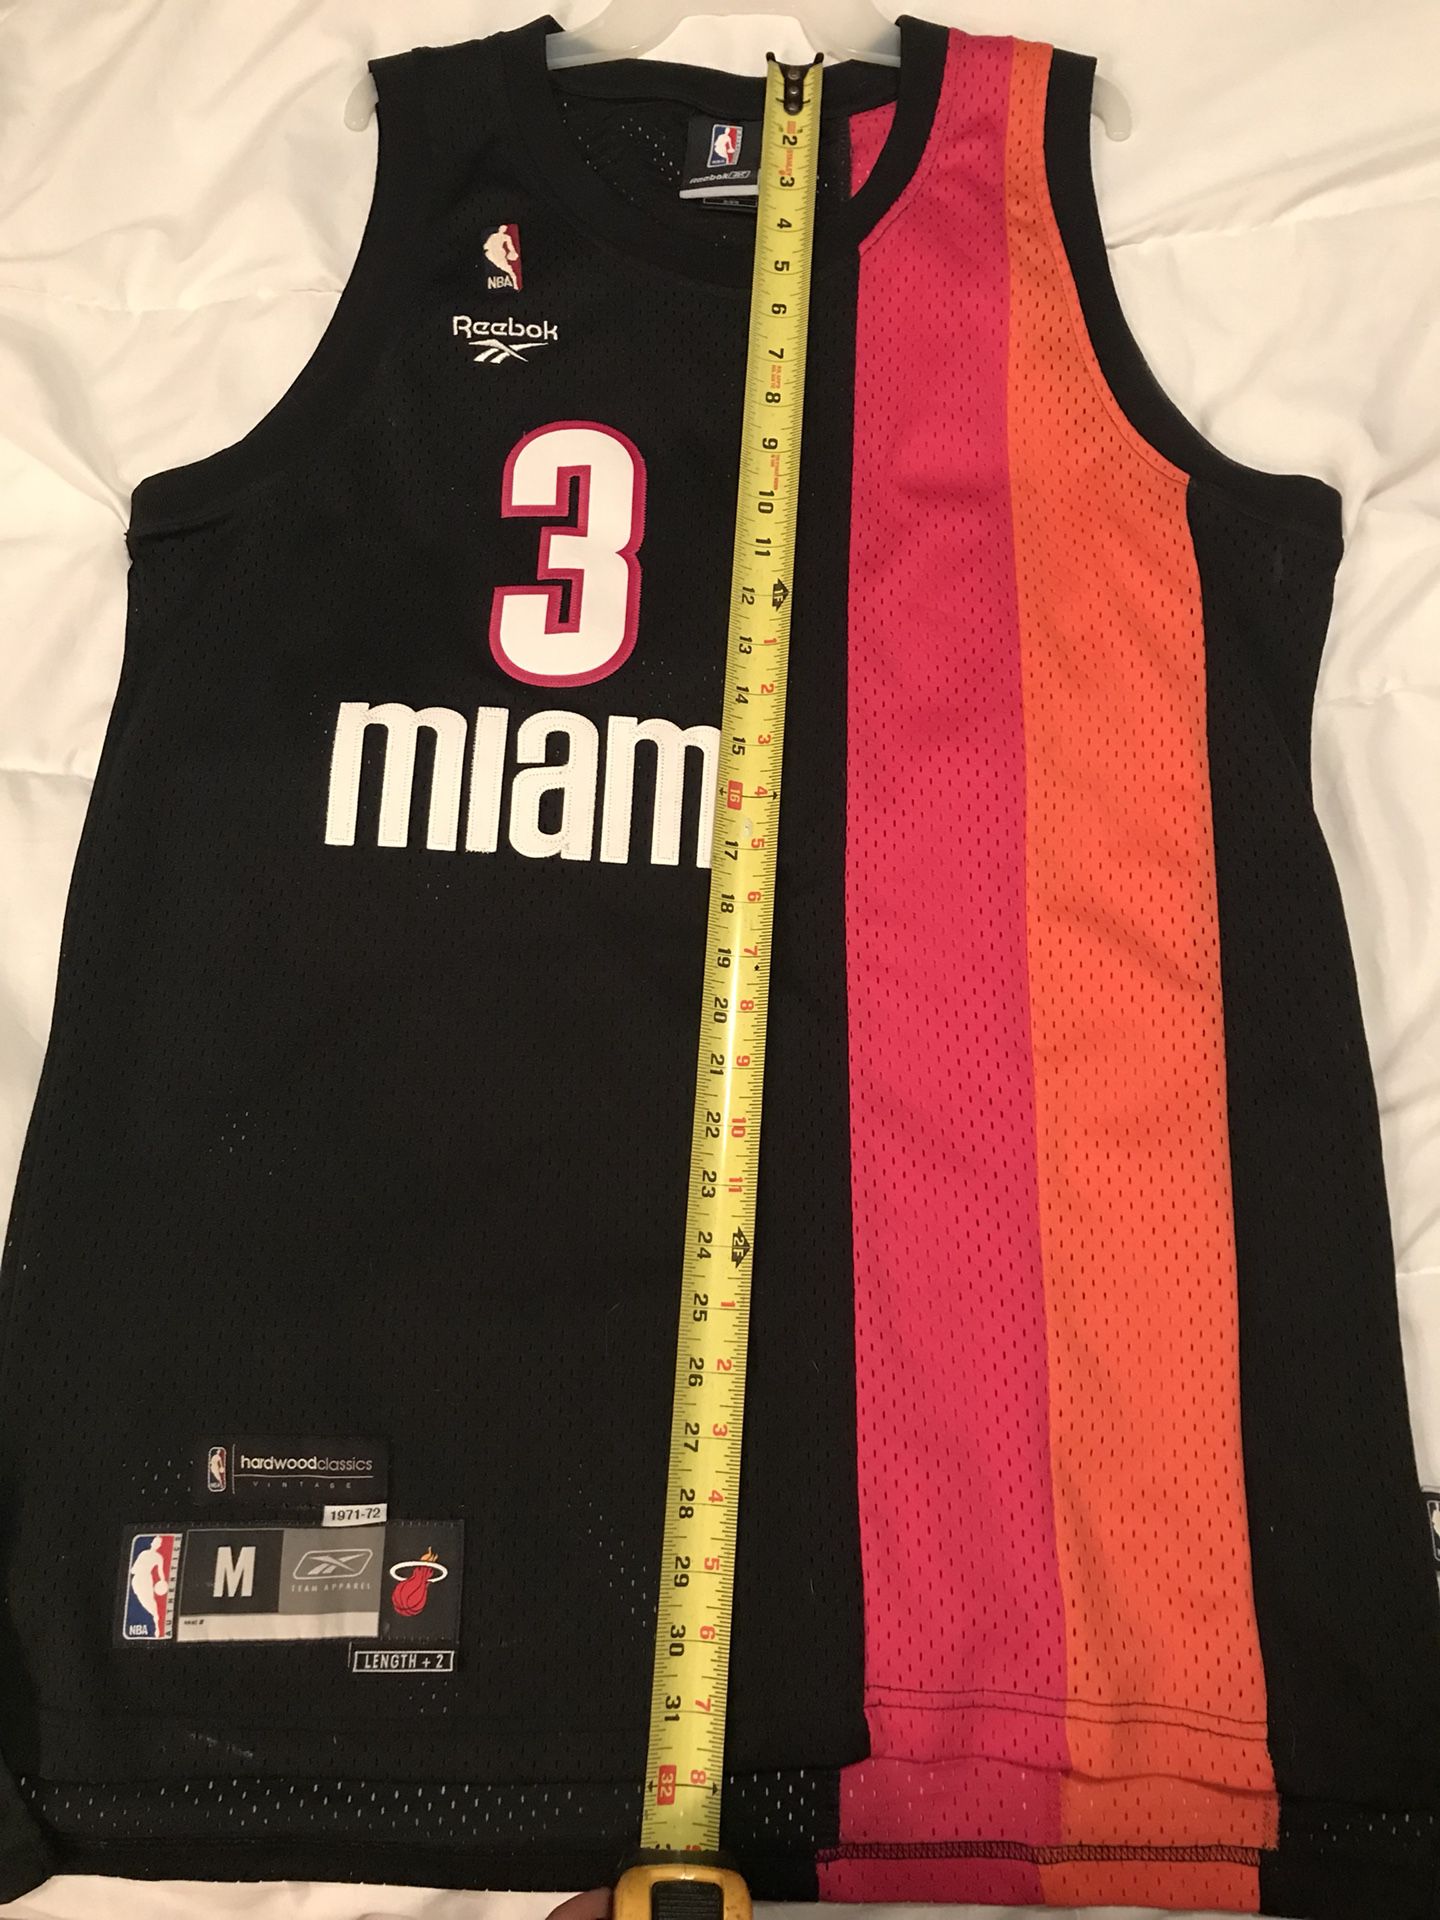 Miami Heat Jersey for Sale in Southington, CT - OfferUp